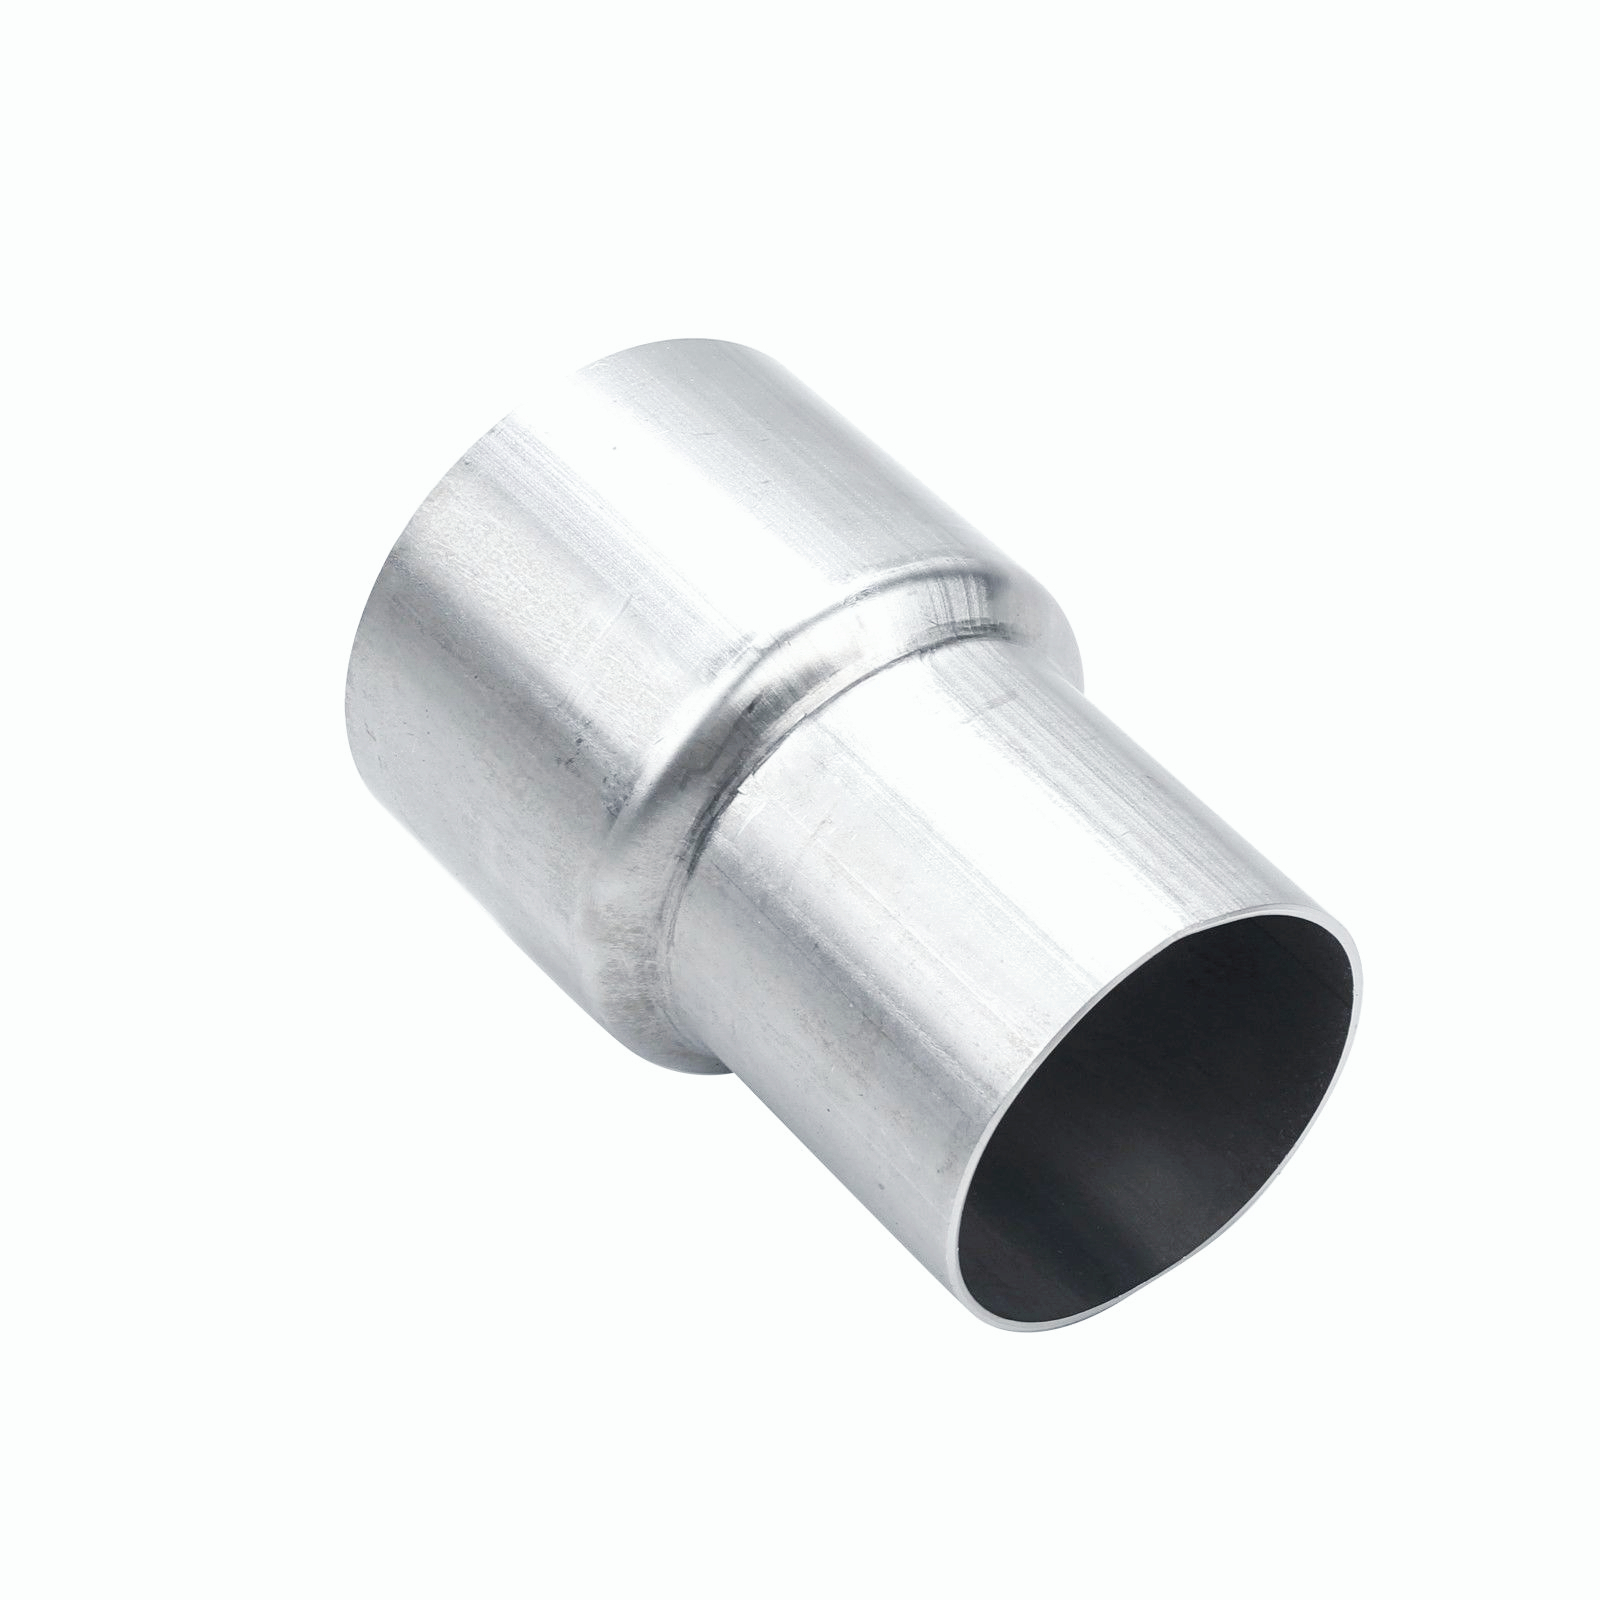 2.75" ID to 3" OD Exhaust Pipe Component Adapter Connector Reducer Universal